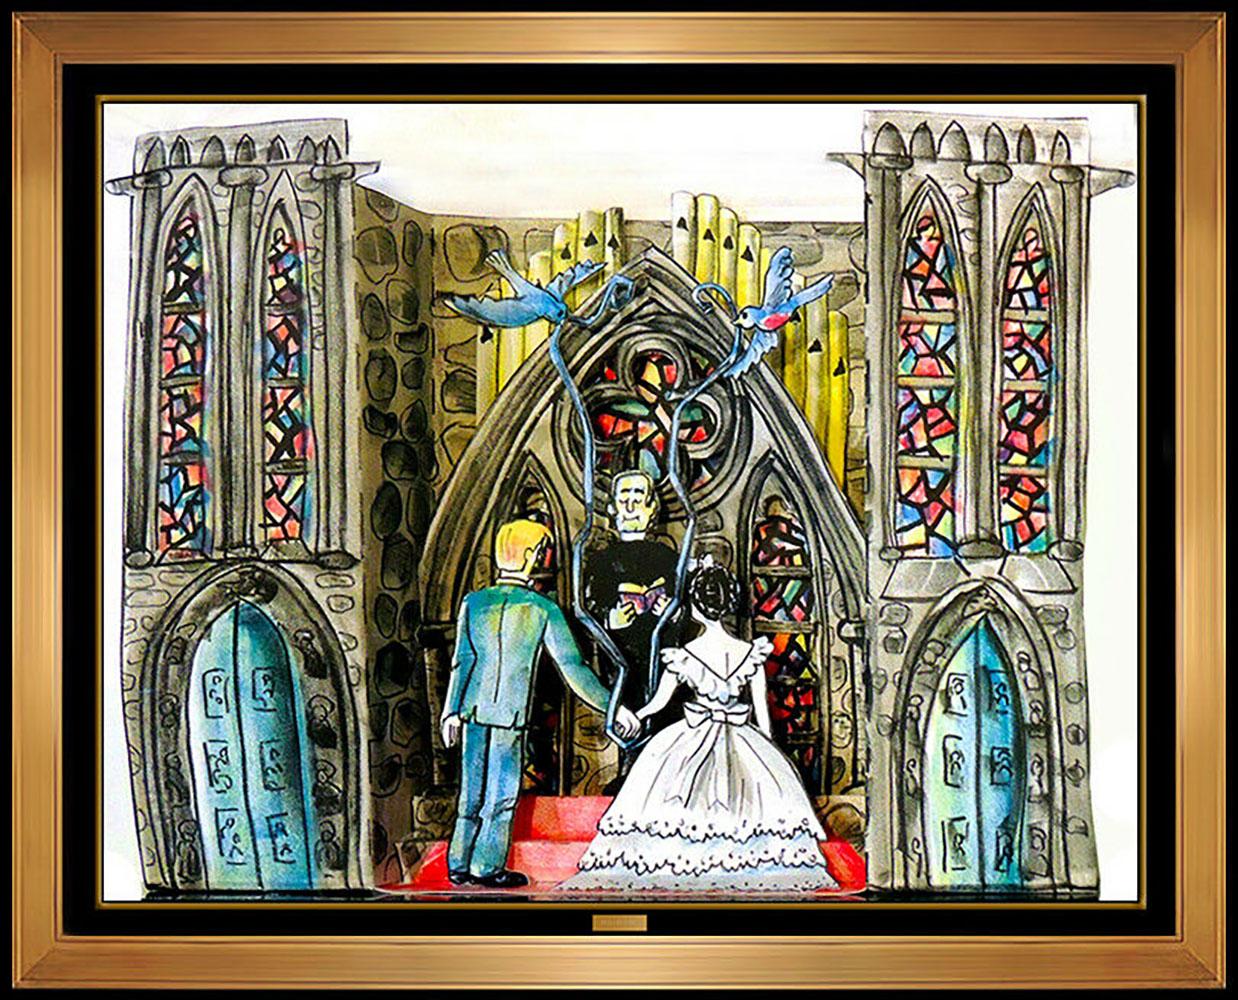 Red Grooms Original and Authentic 3-D Color Lithograph "The Wedding", Professionally Custom Framed and Listed with the Submit Best Offer option

Accepting Offers Now: Up for sale is an extremely rare, Red Grooms Three dimensional lithograph in